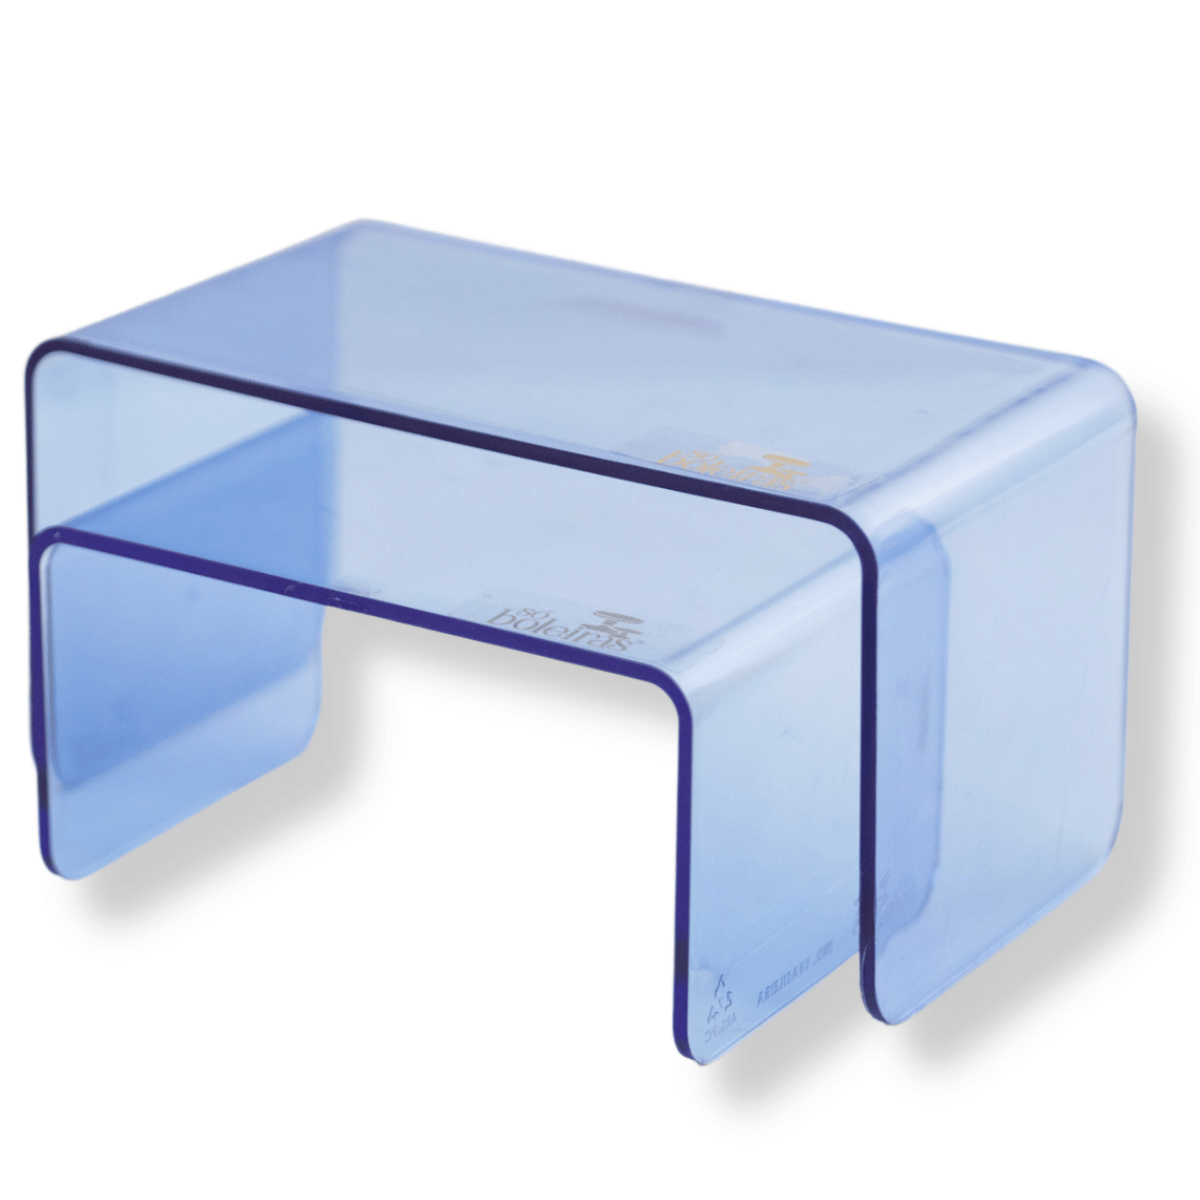 Bic Blue Clean Colorful pair of stands